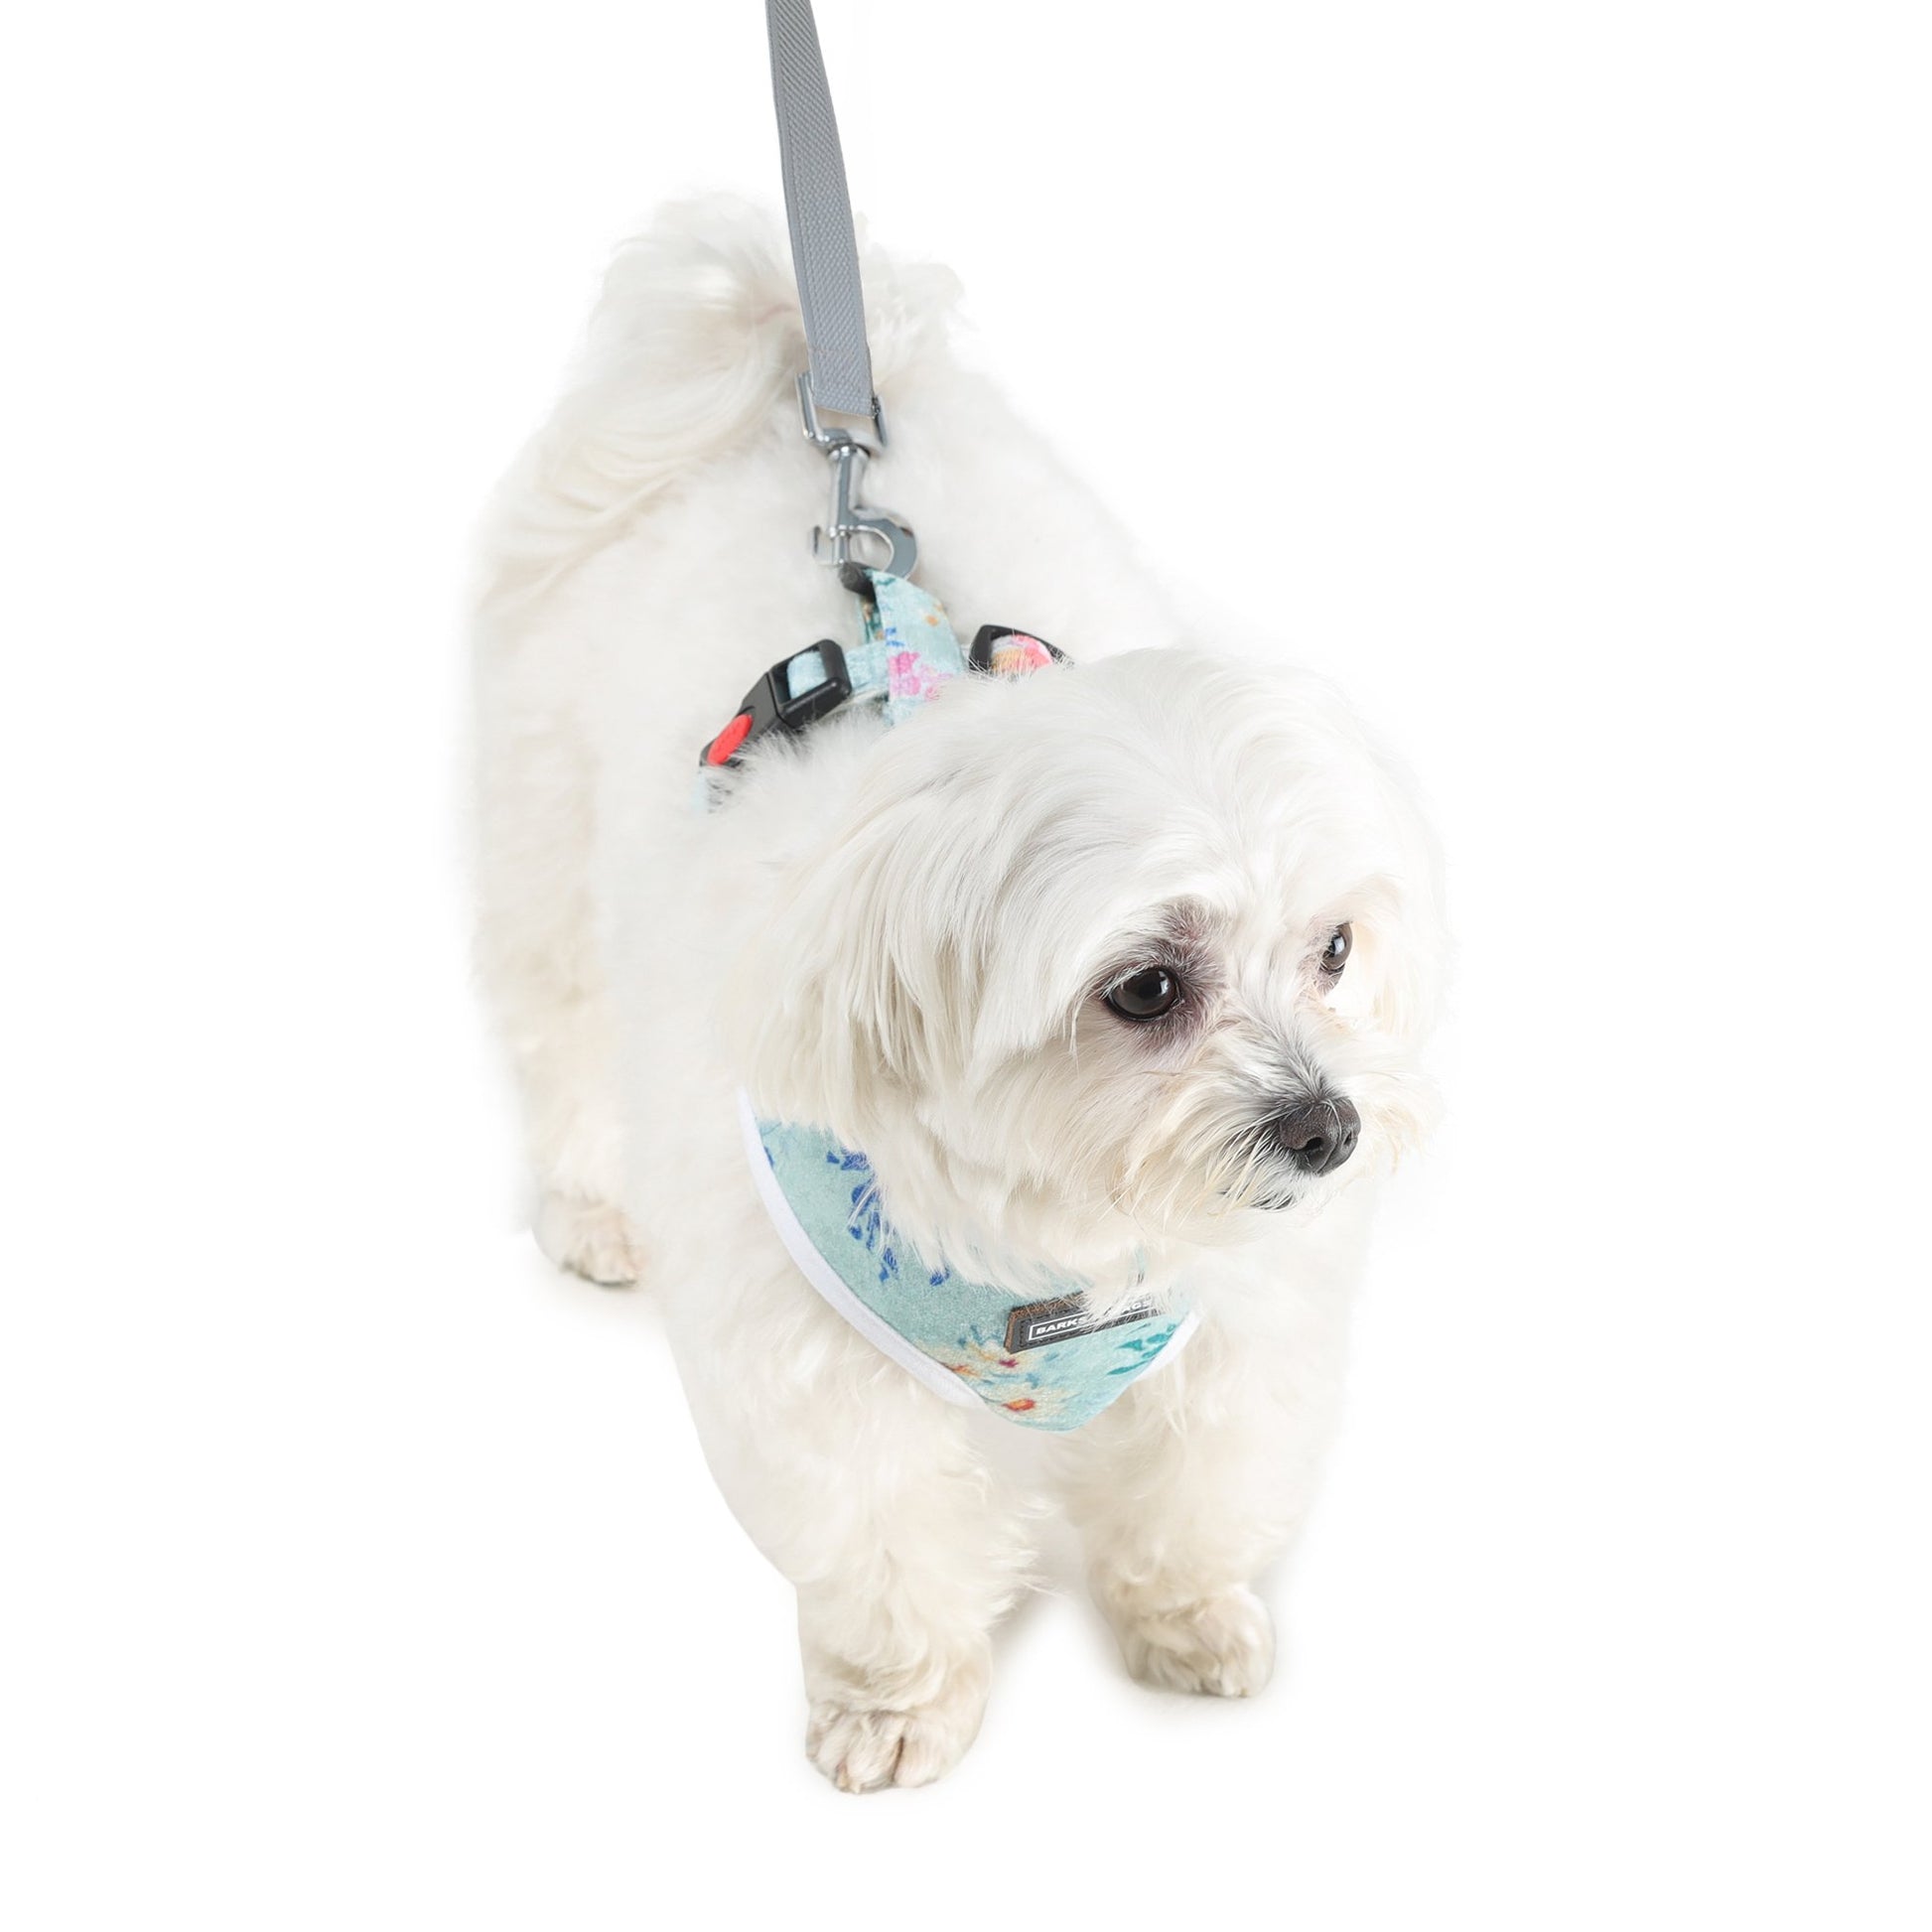 cute dog wearing harness and leash by Barks & Wags